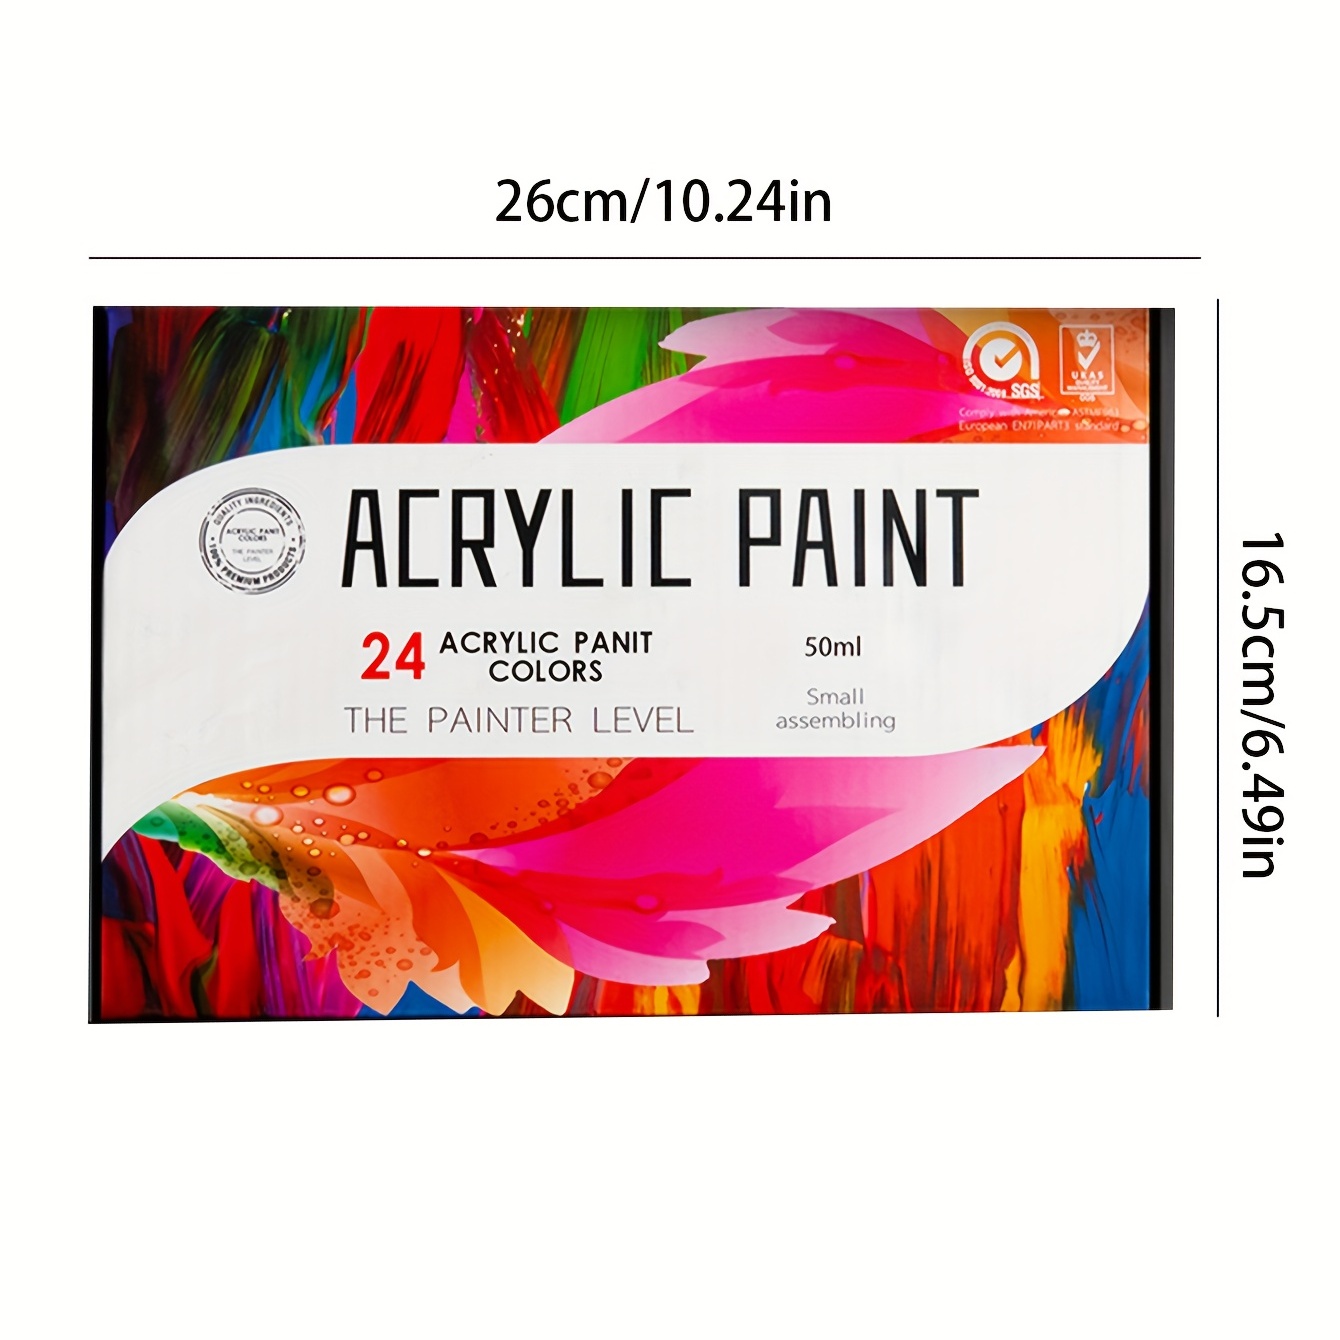 Acrylic Paint Set 24 Colors (2 oz/Bottle) with 12 Art Brushes Art Supplies  for Painting Canvas Wood Ceramic & Fabric Rich Pigments Lasting Quality for  Beginners Students & Professional Artist